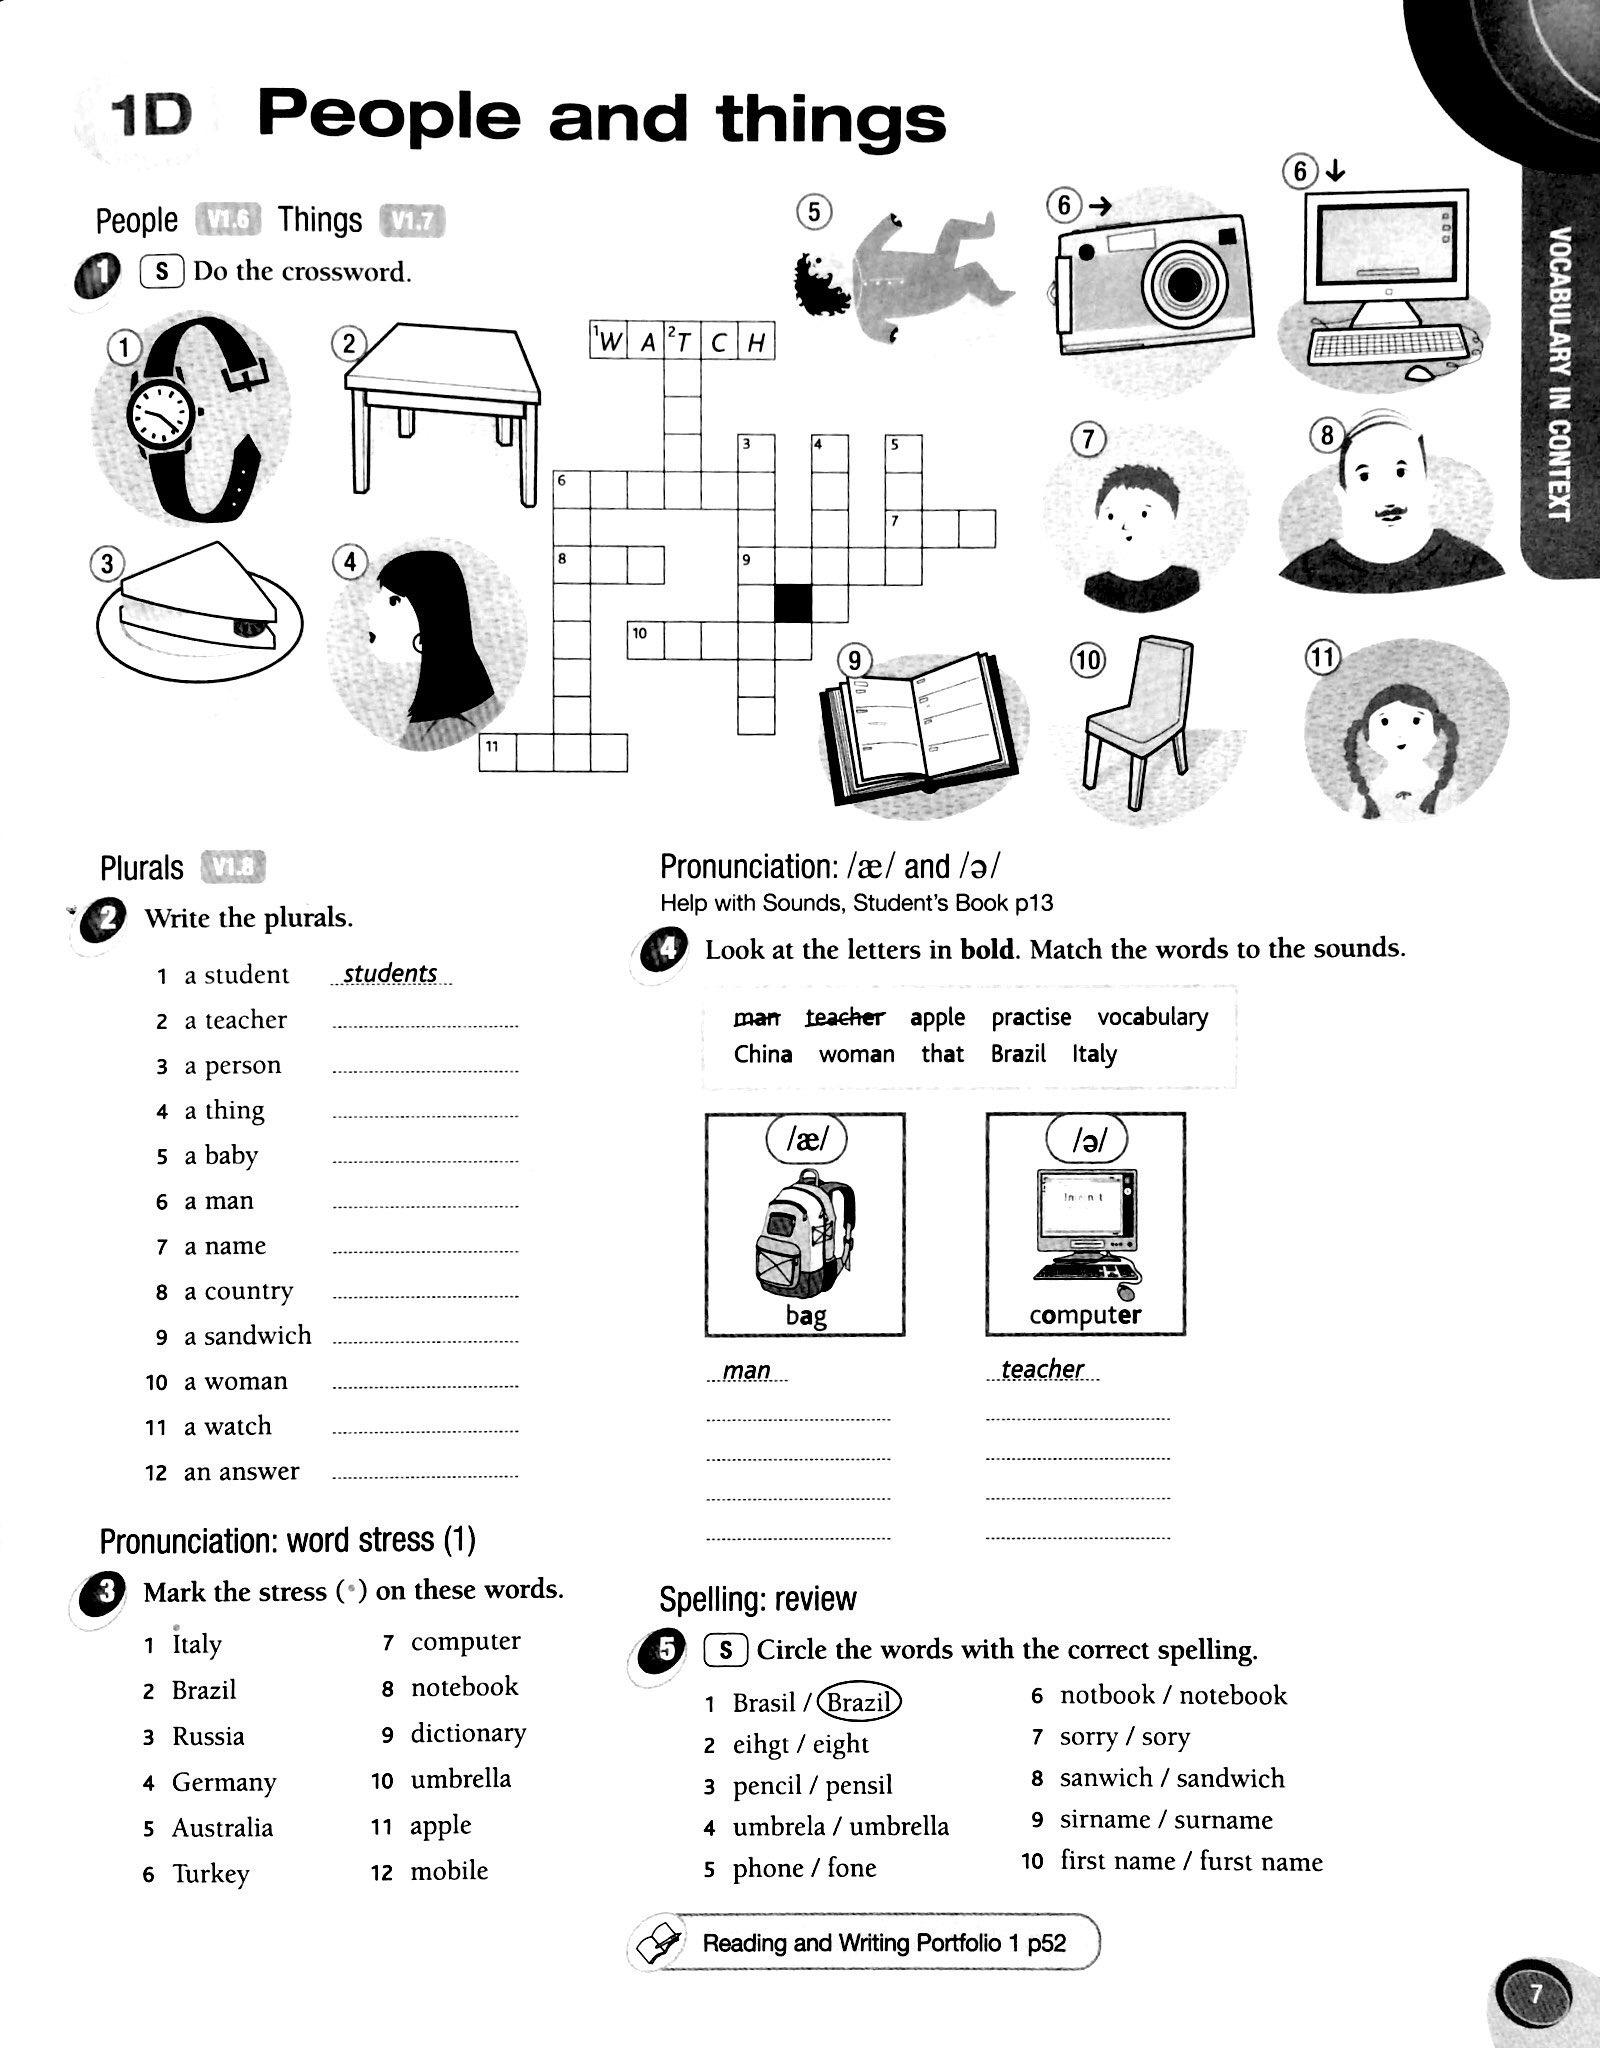 Face2face Starter Workbook with Key